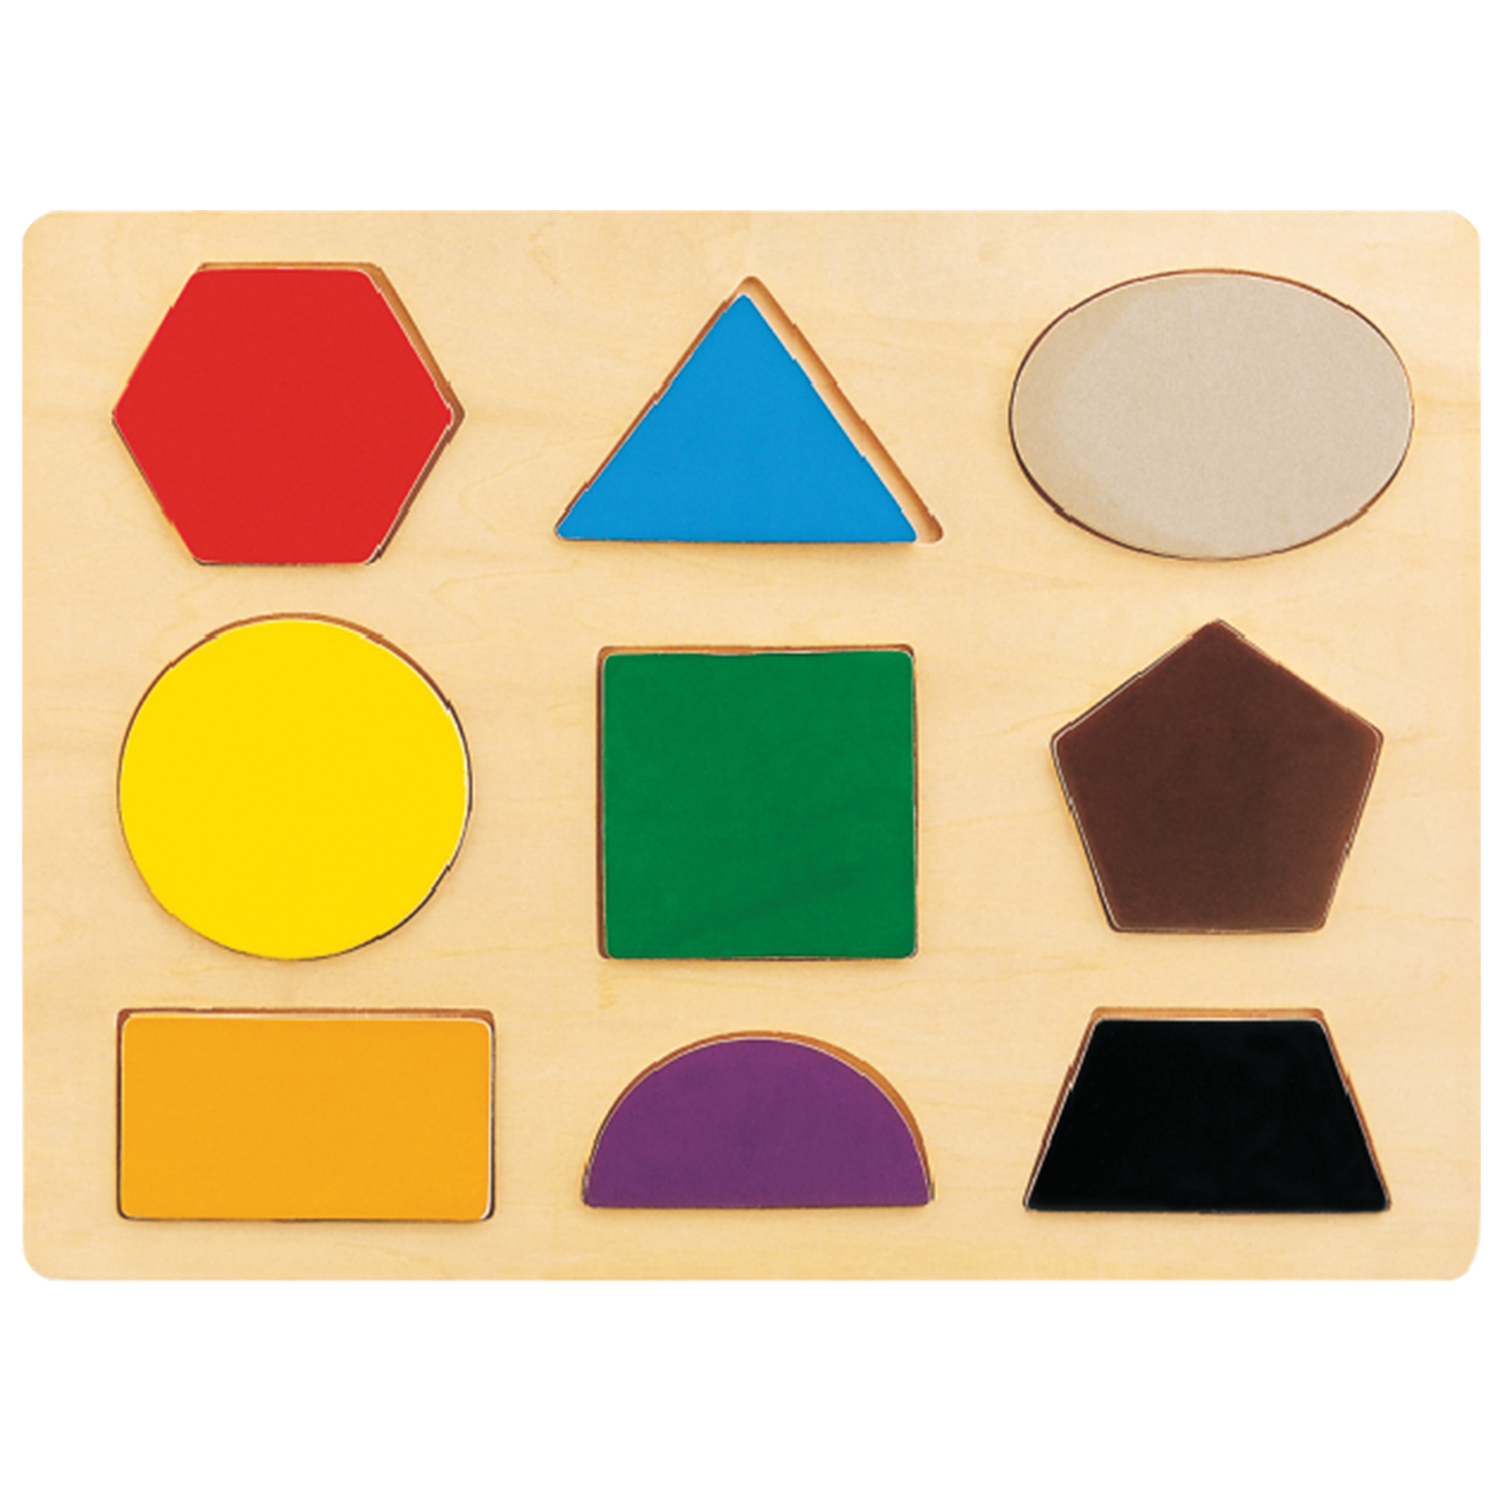 9 shapes chunky puzzle -  